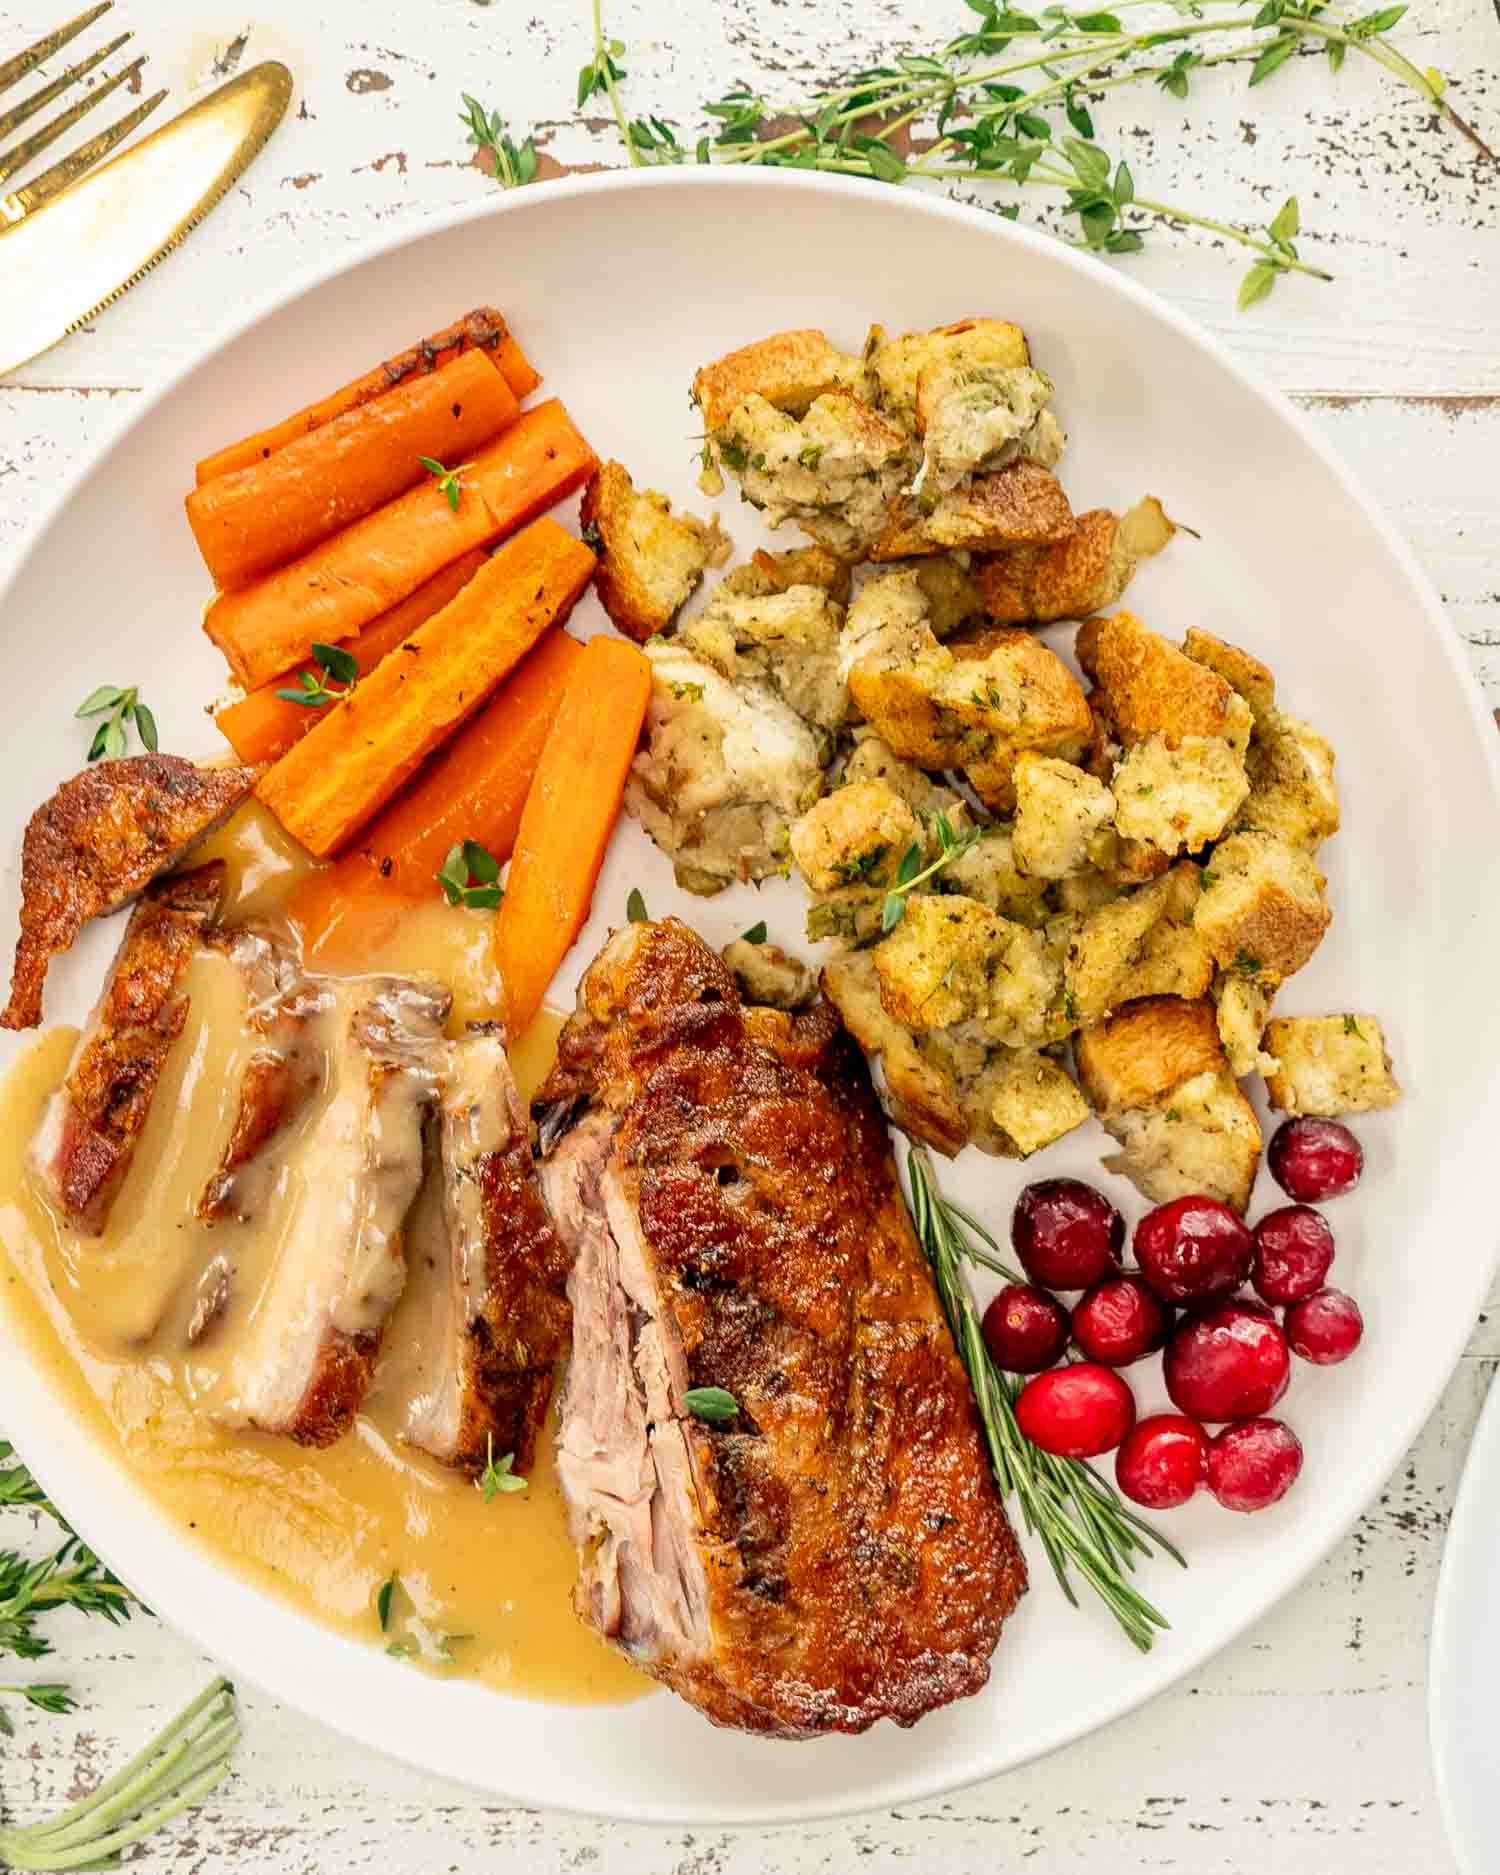 a plate full of stuffing, turkey thigh, carrots and garnished with gravy, cranberries and rosemary.